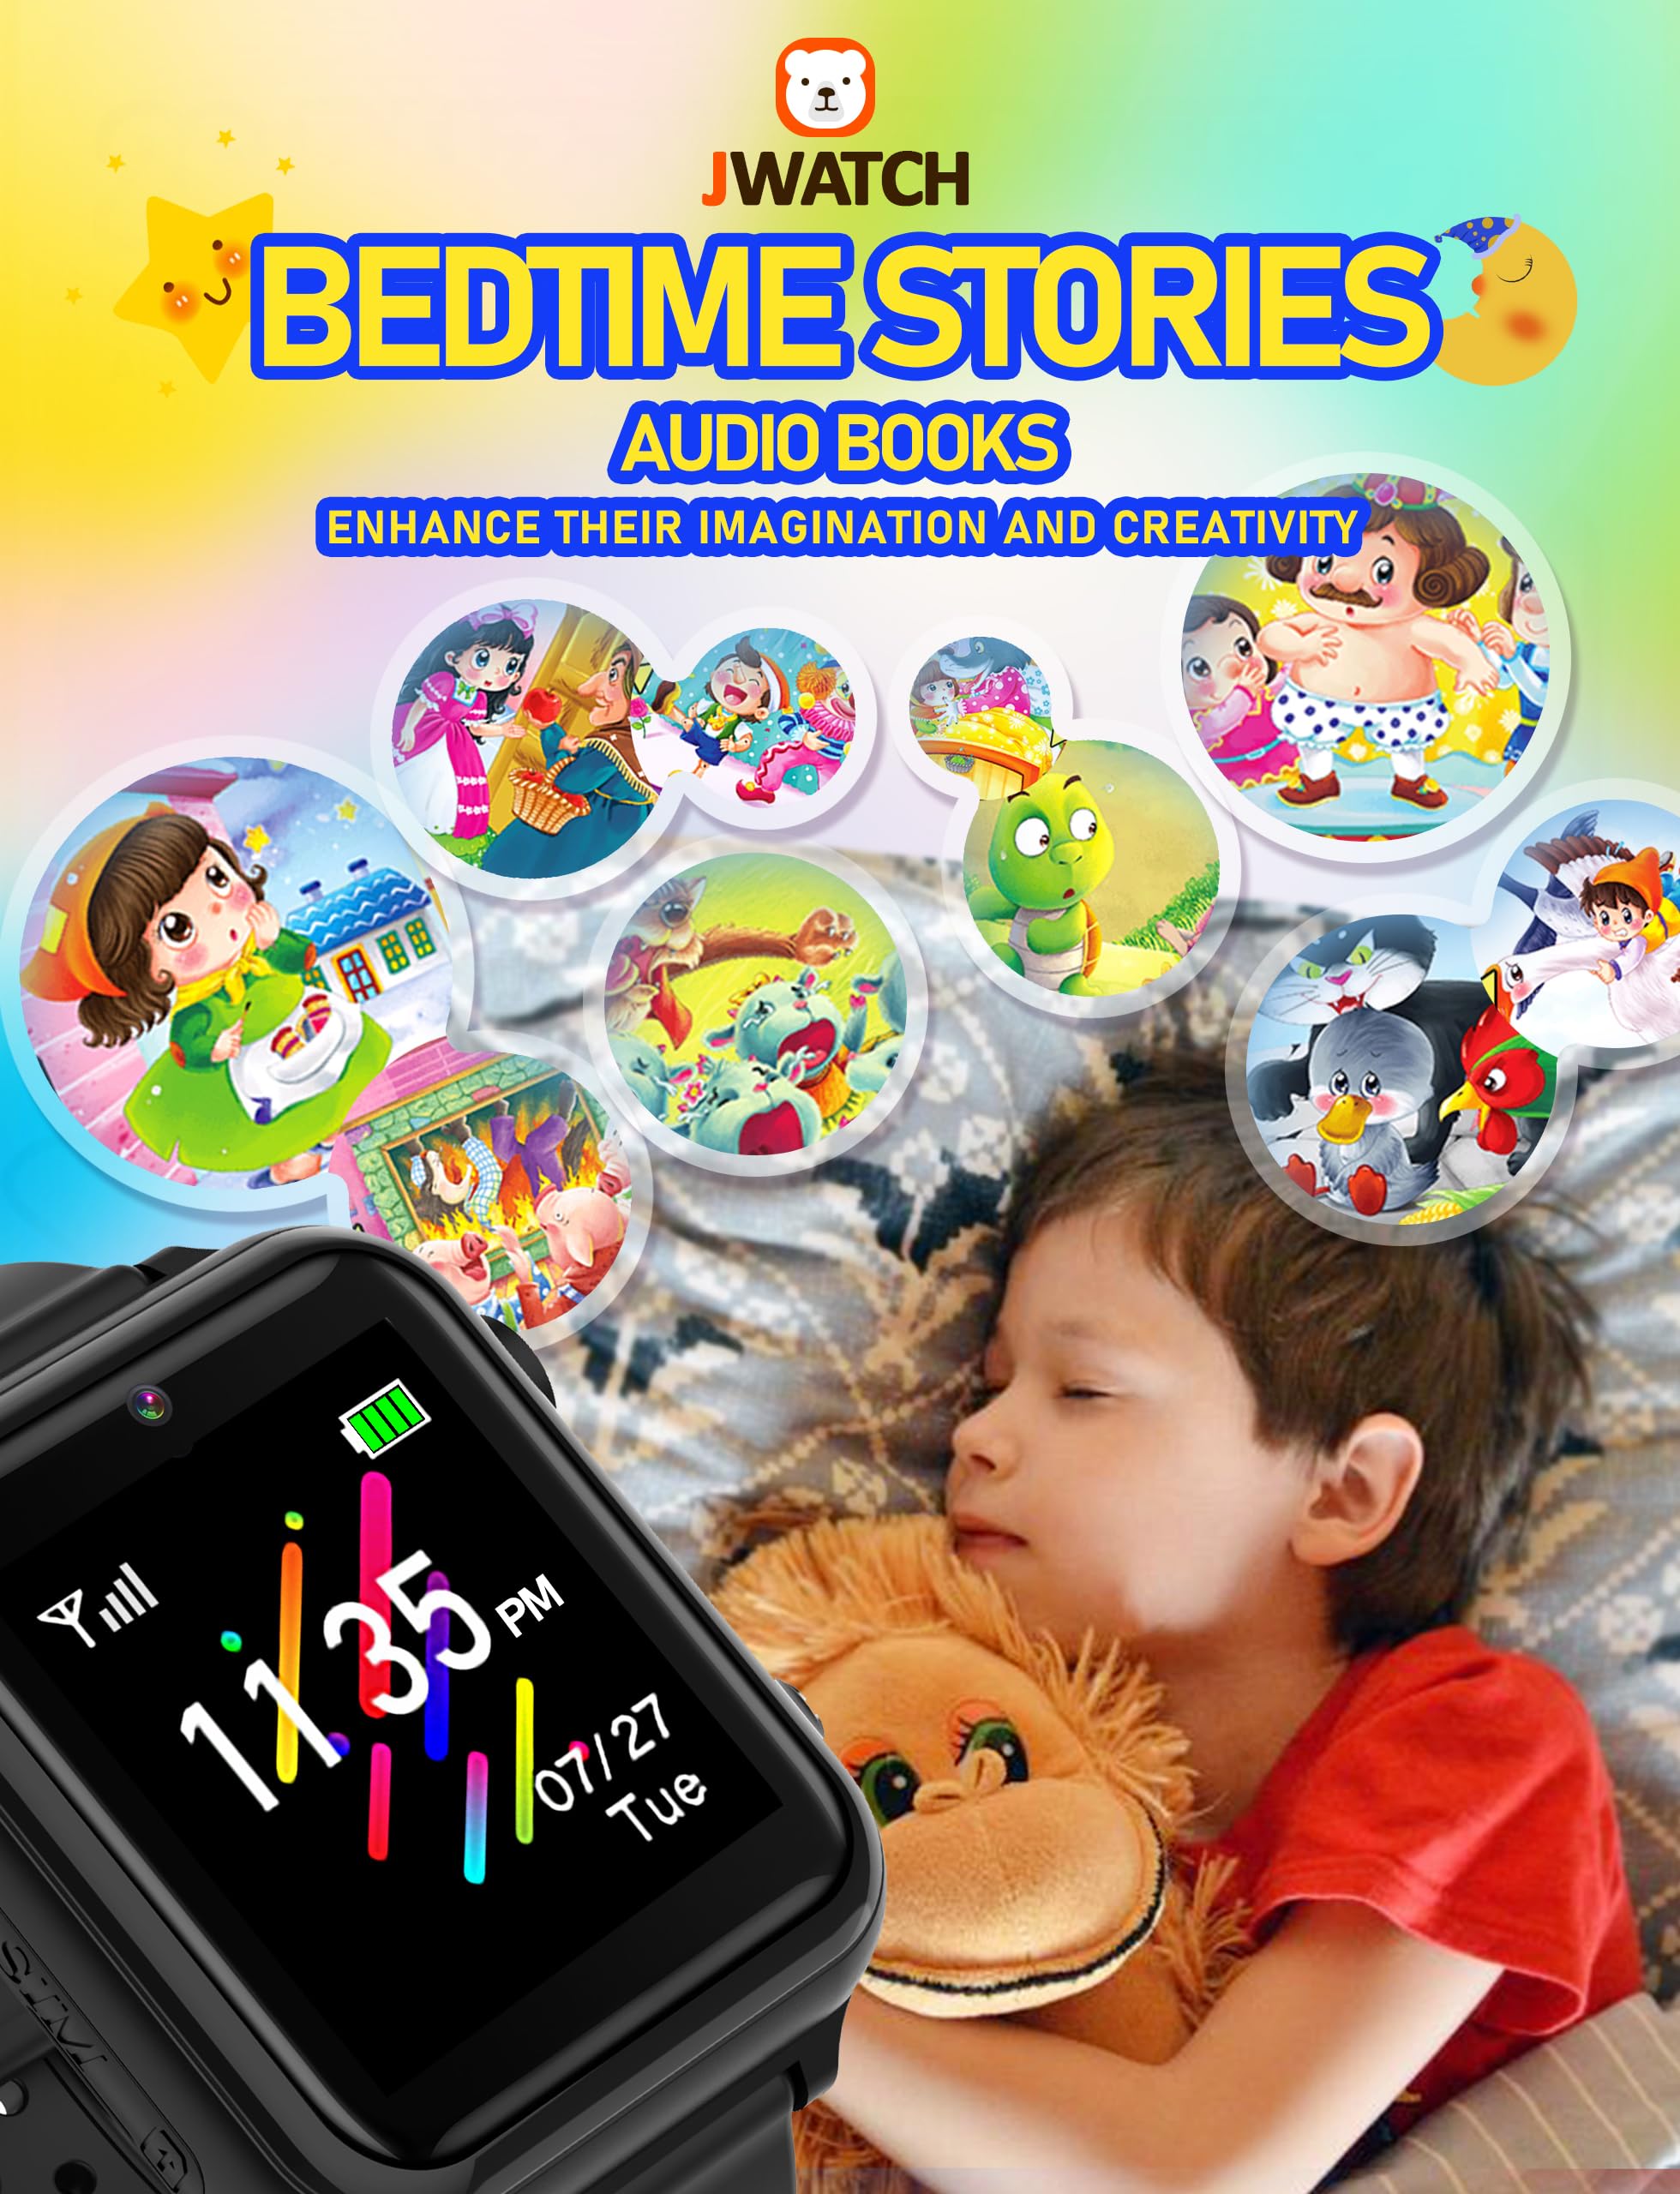 Jwatch Kids Smart Watch Phone Sos with 10 storys 16 Puzzle Games Stopwatch Alarm Clock Kids Watches Toys for 6 7 8 9 10 11 12 Boys Girls Gift for Birthday Christmas (Black)…